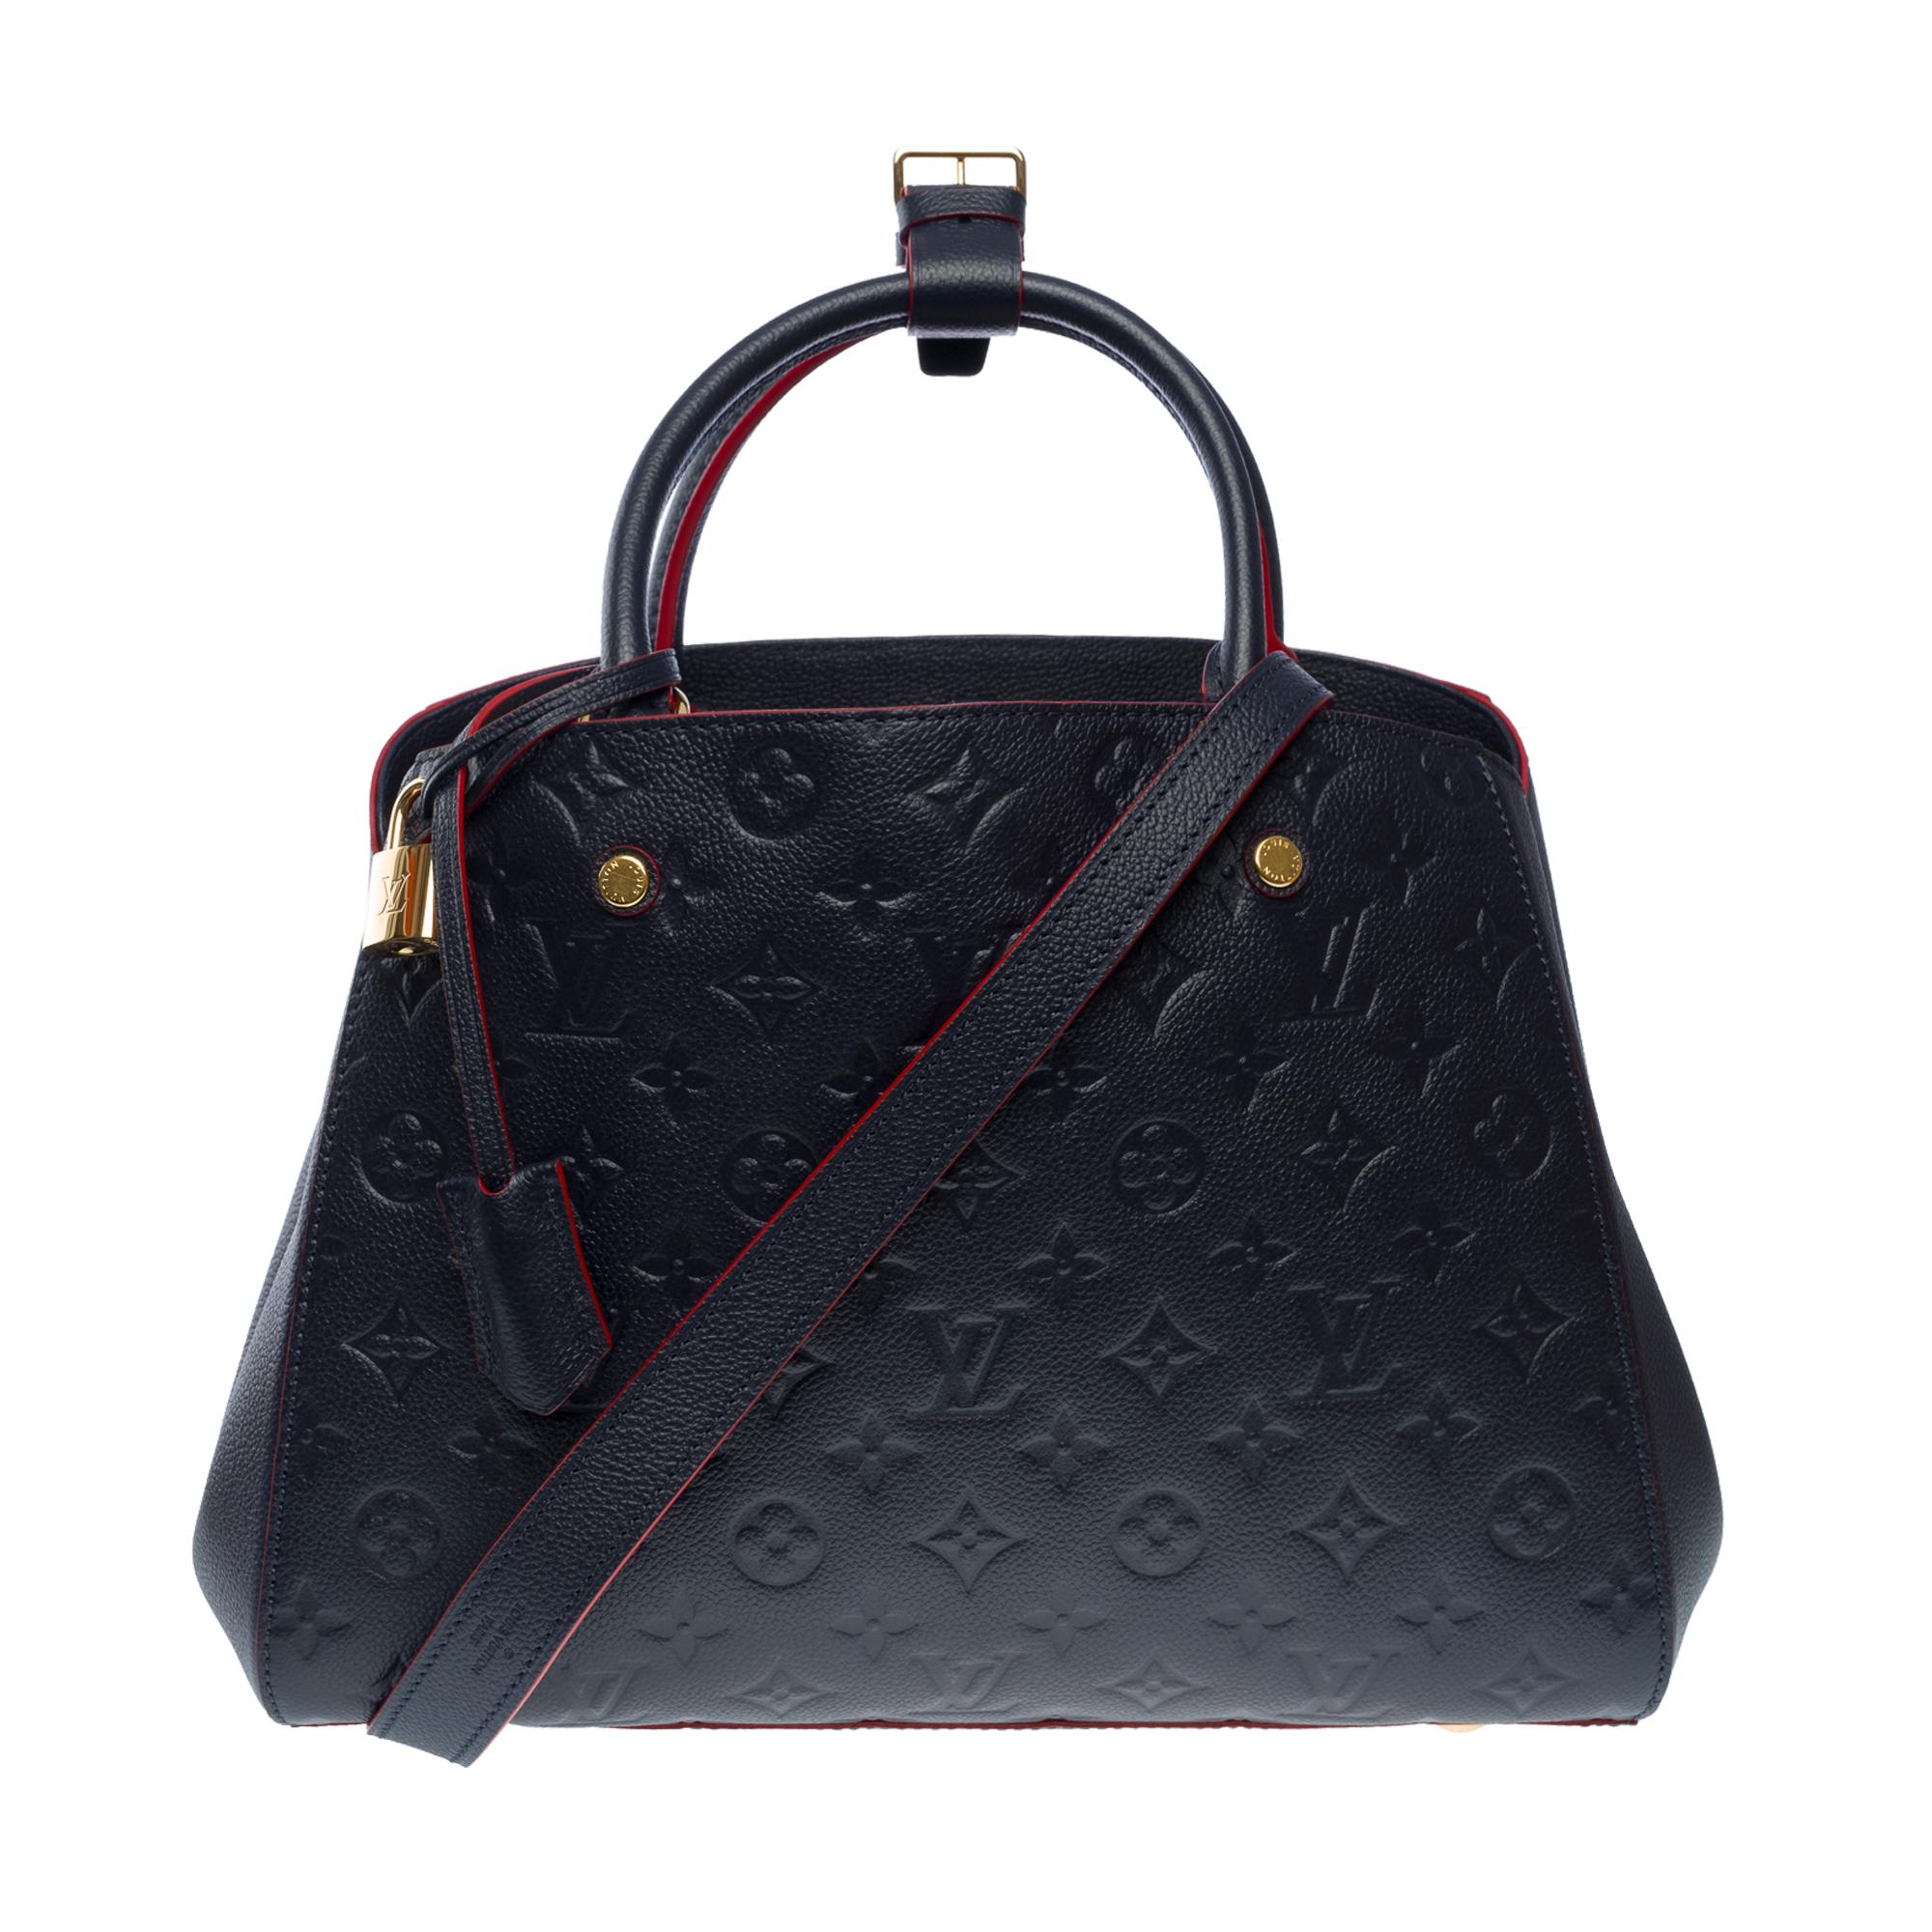 Gorgeous Louis Vuitton Montaigne MM in navy blue imprint monogram leather with red slices , gold metal hardware, double handle in blue leather, removable shoulder handle in navy leather for hand or shoulder carry

Snap closure
Interior lining in red